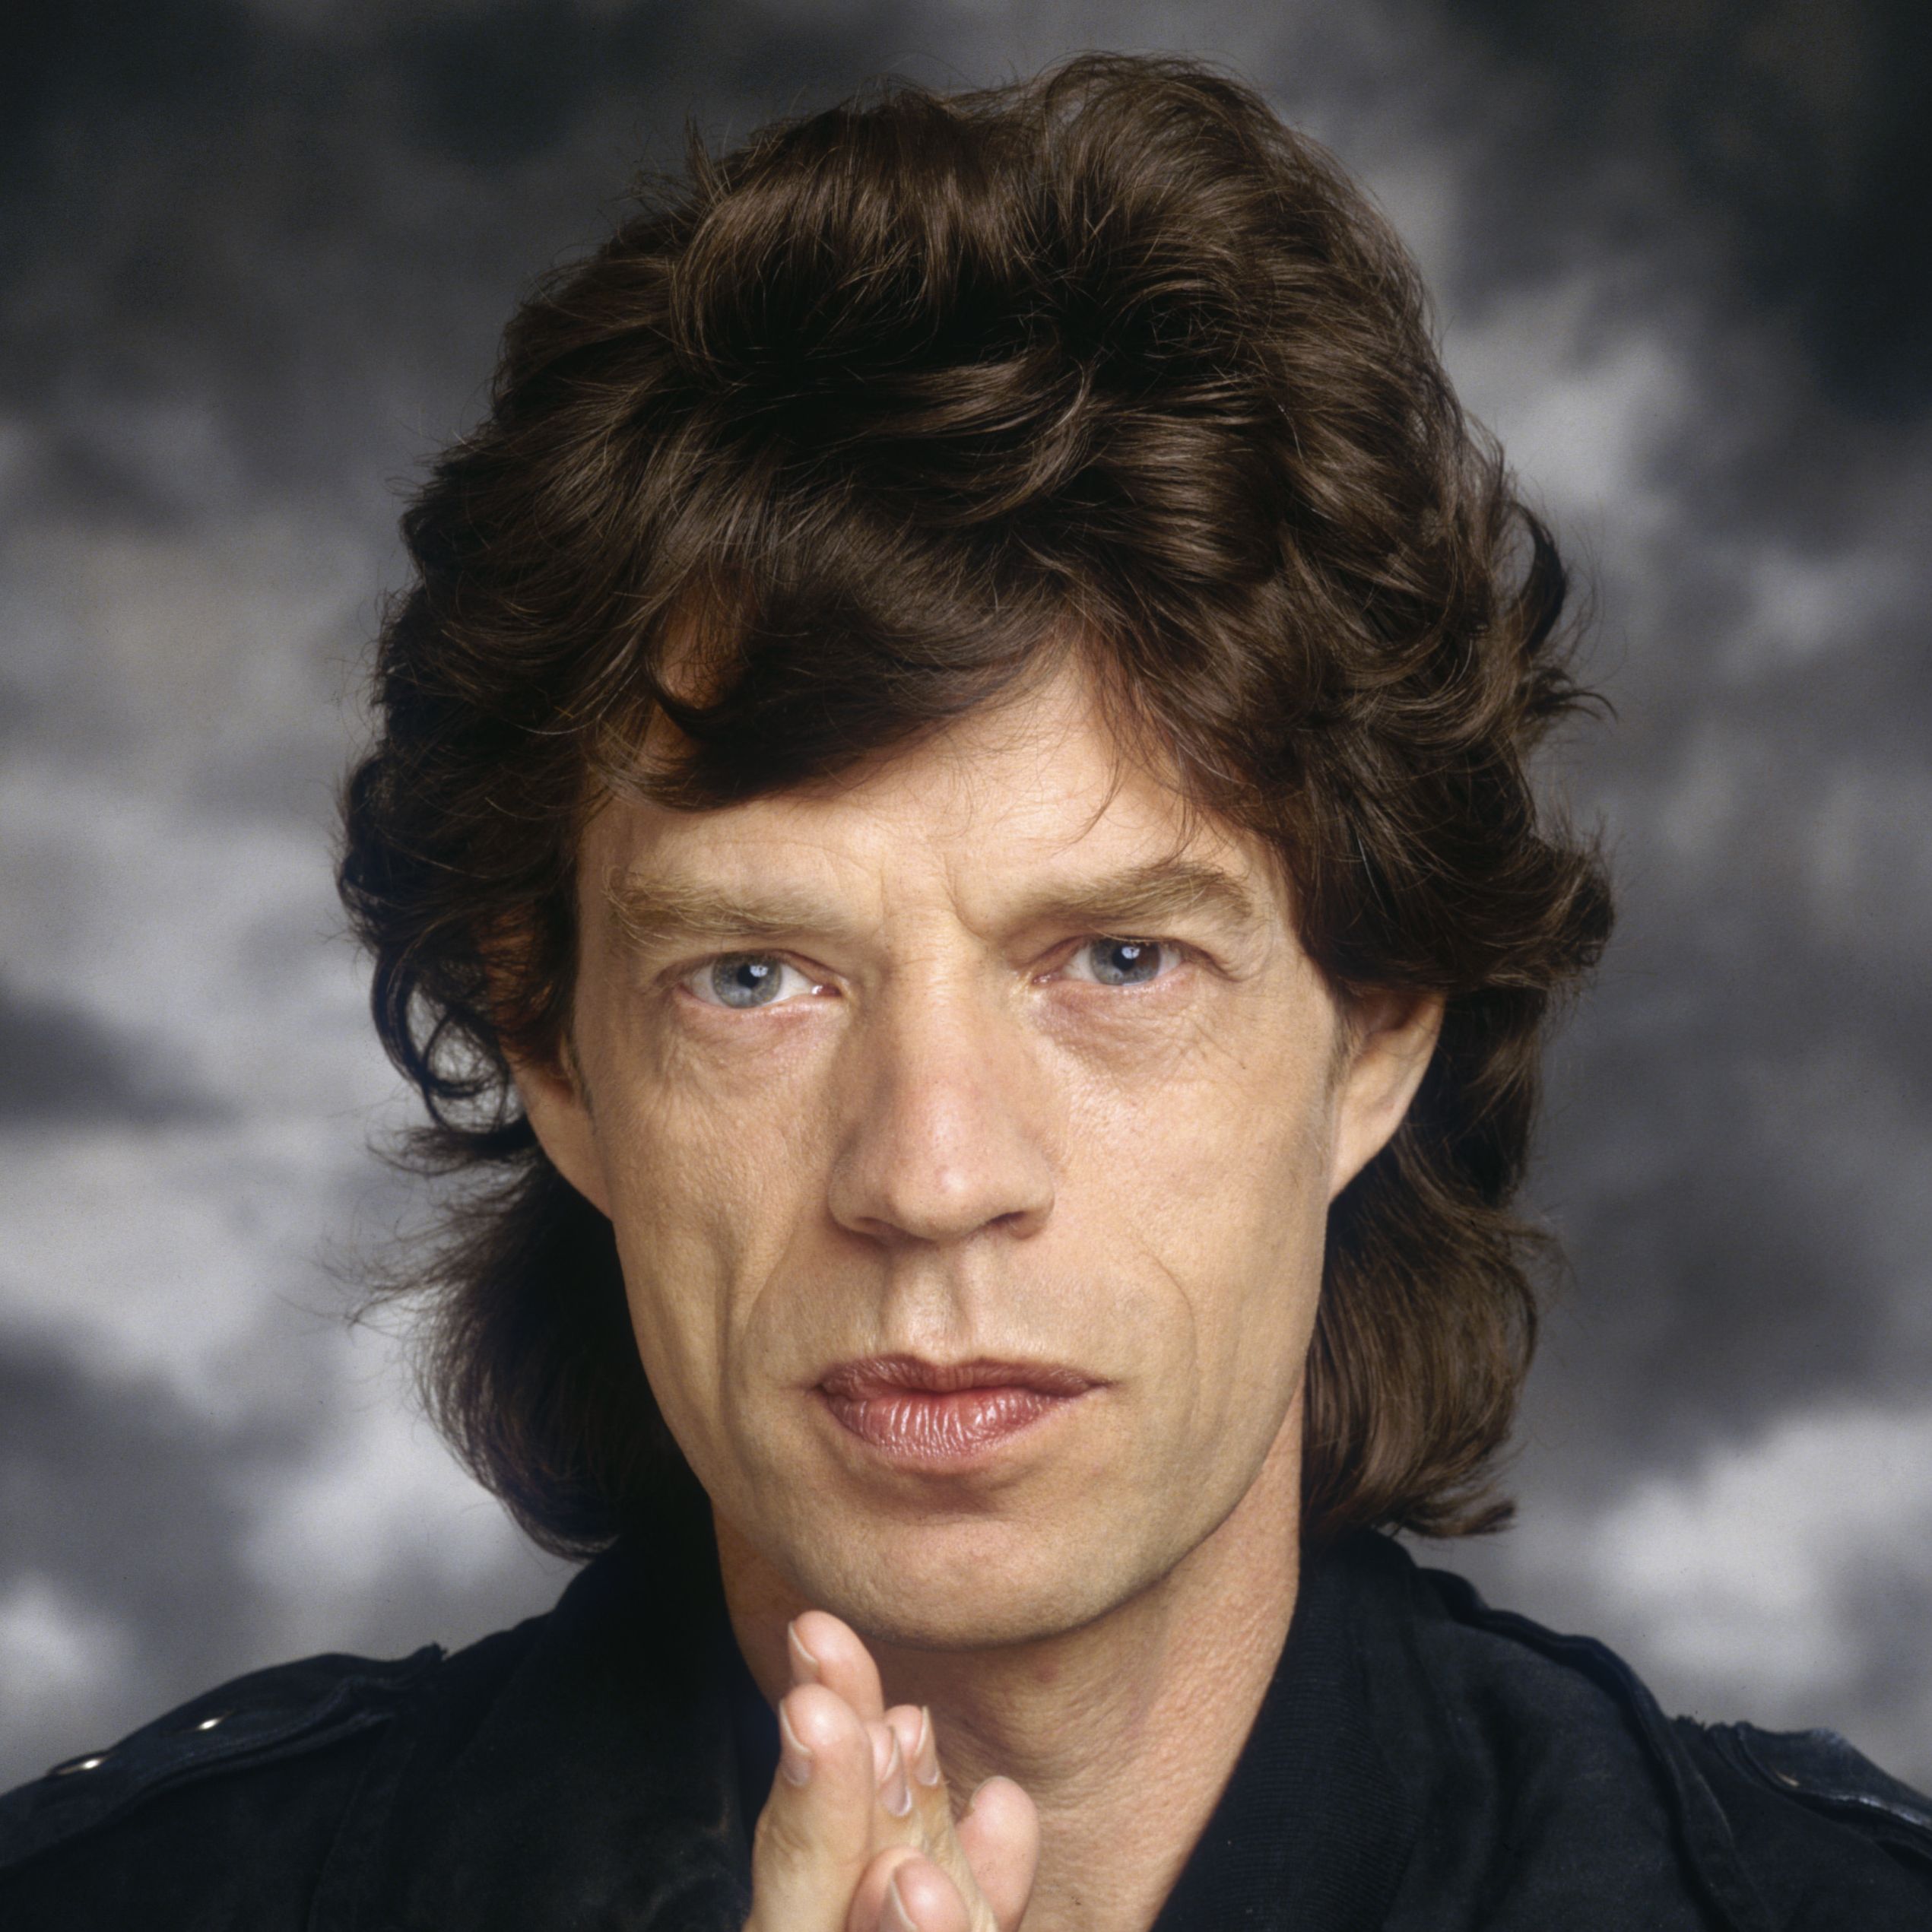 Mick Jagger GettyImages 56429349 